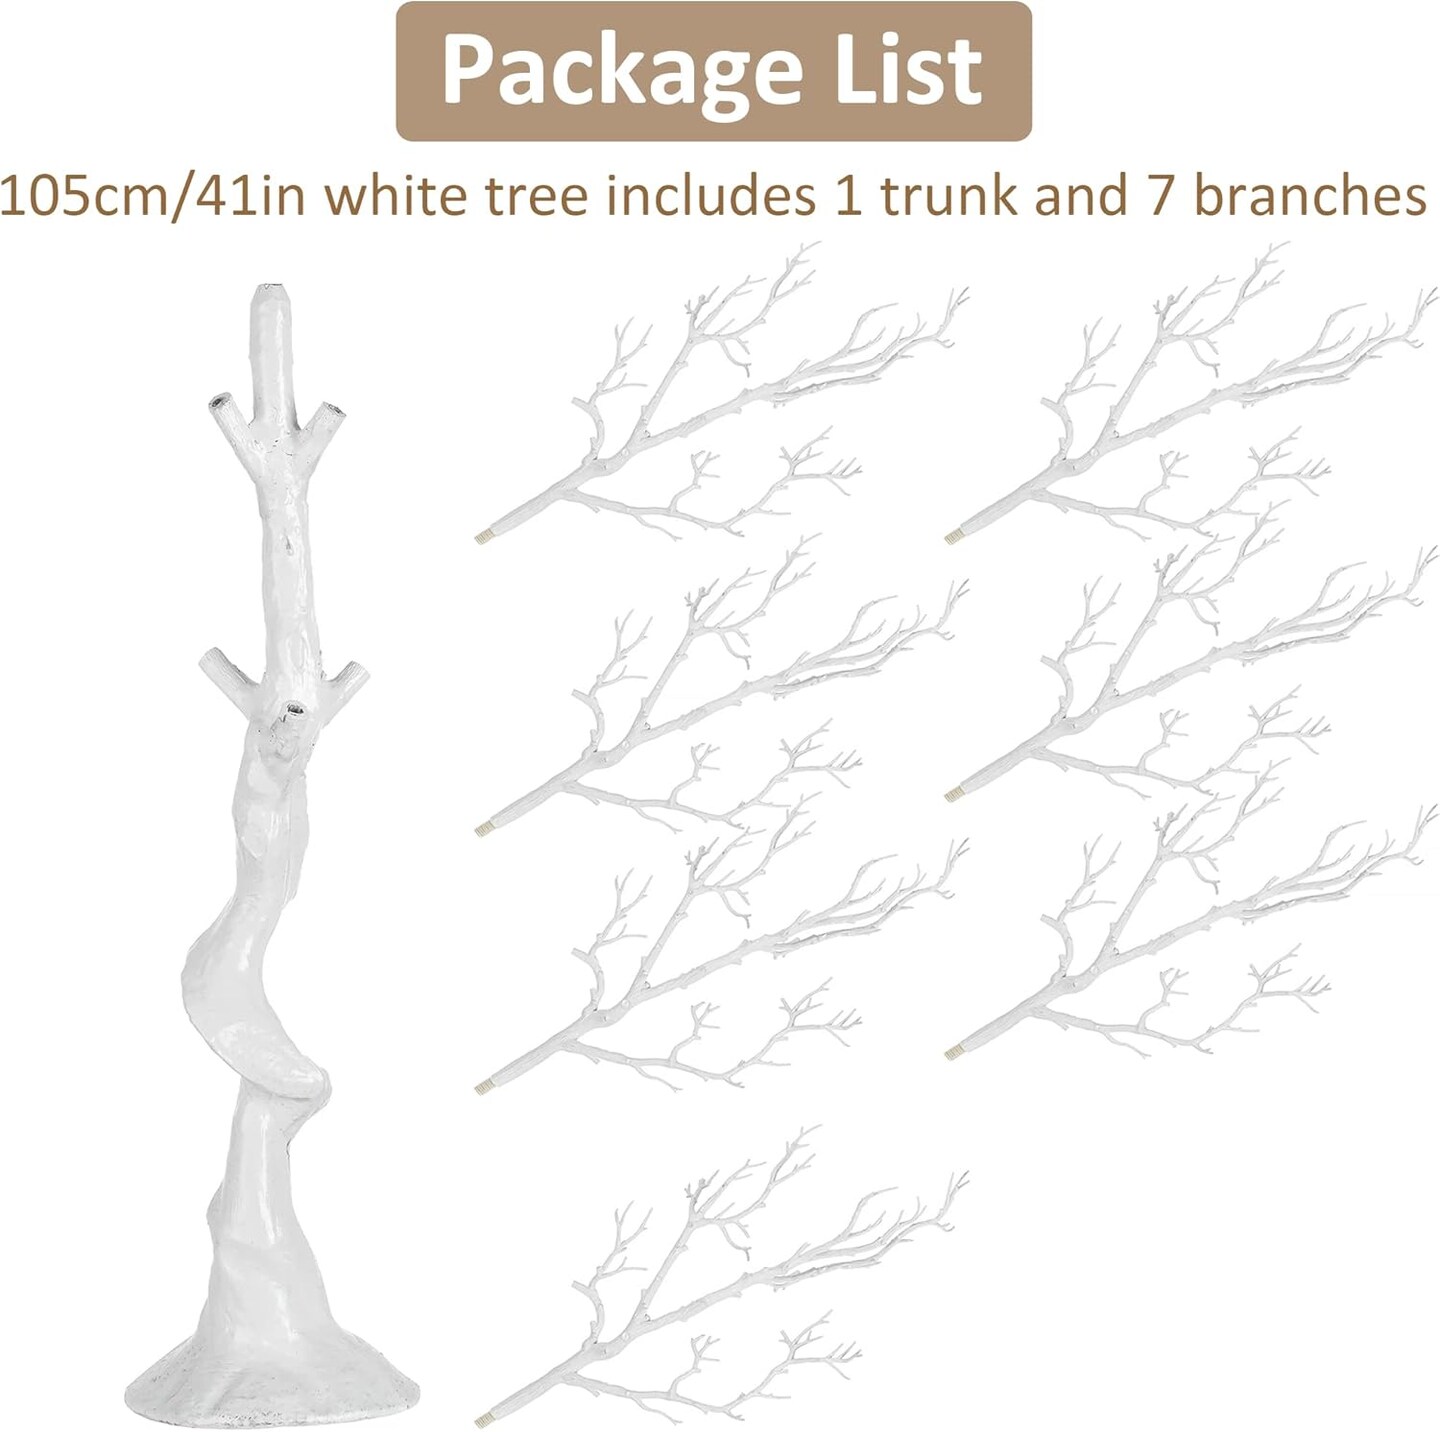 Ornament Display Tree: White Artificial Trees 3.4FT Tall Fake Decorative Manzanita Tree for Table Centerpiece Wedding Party Birthday Garden Christmas Decorations